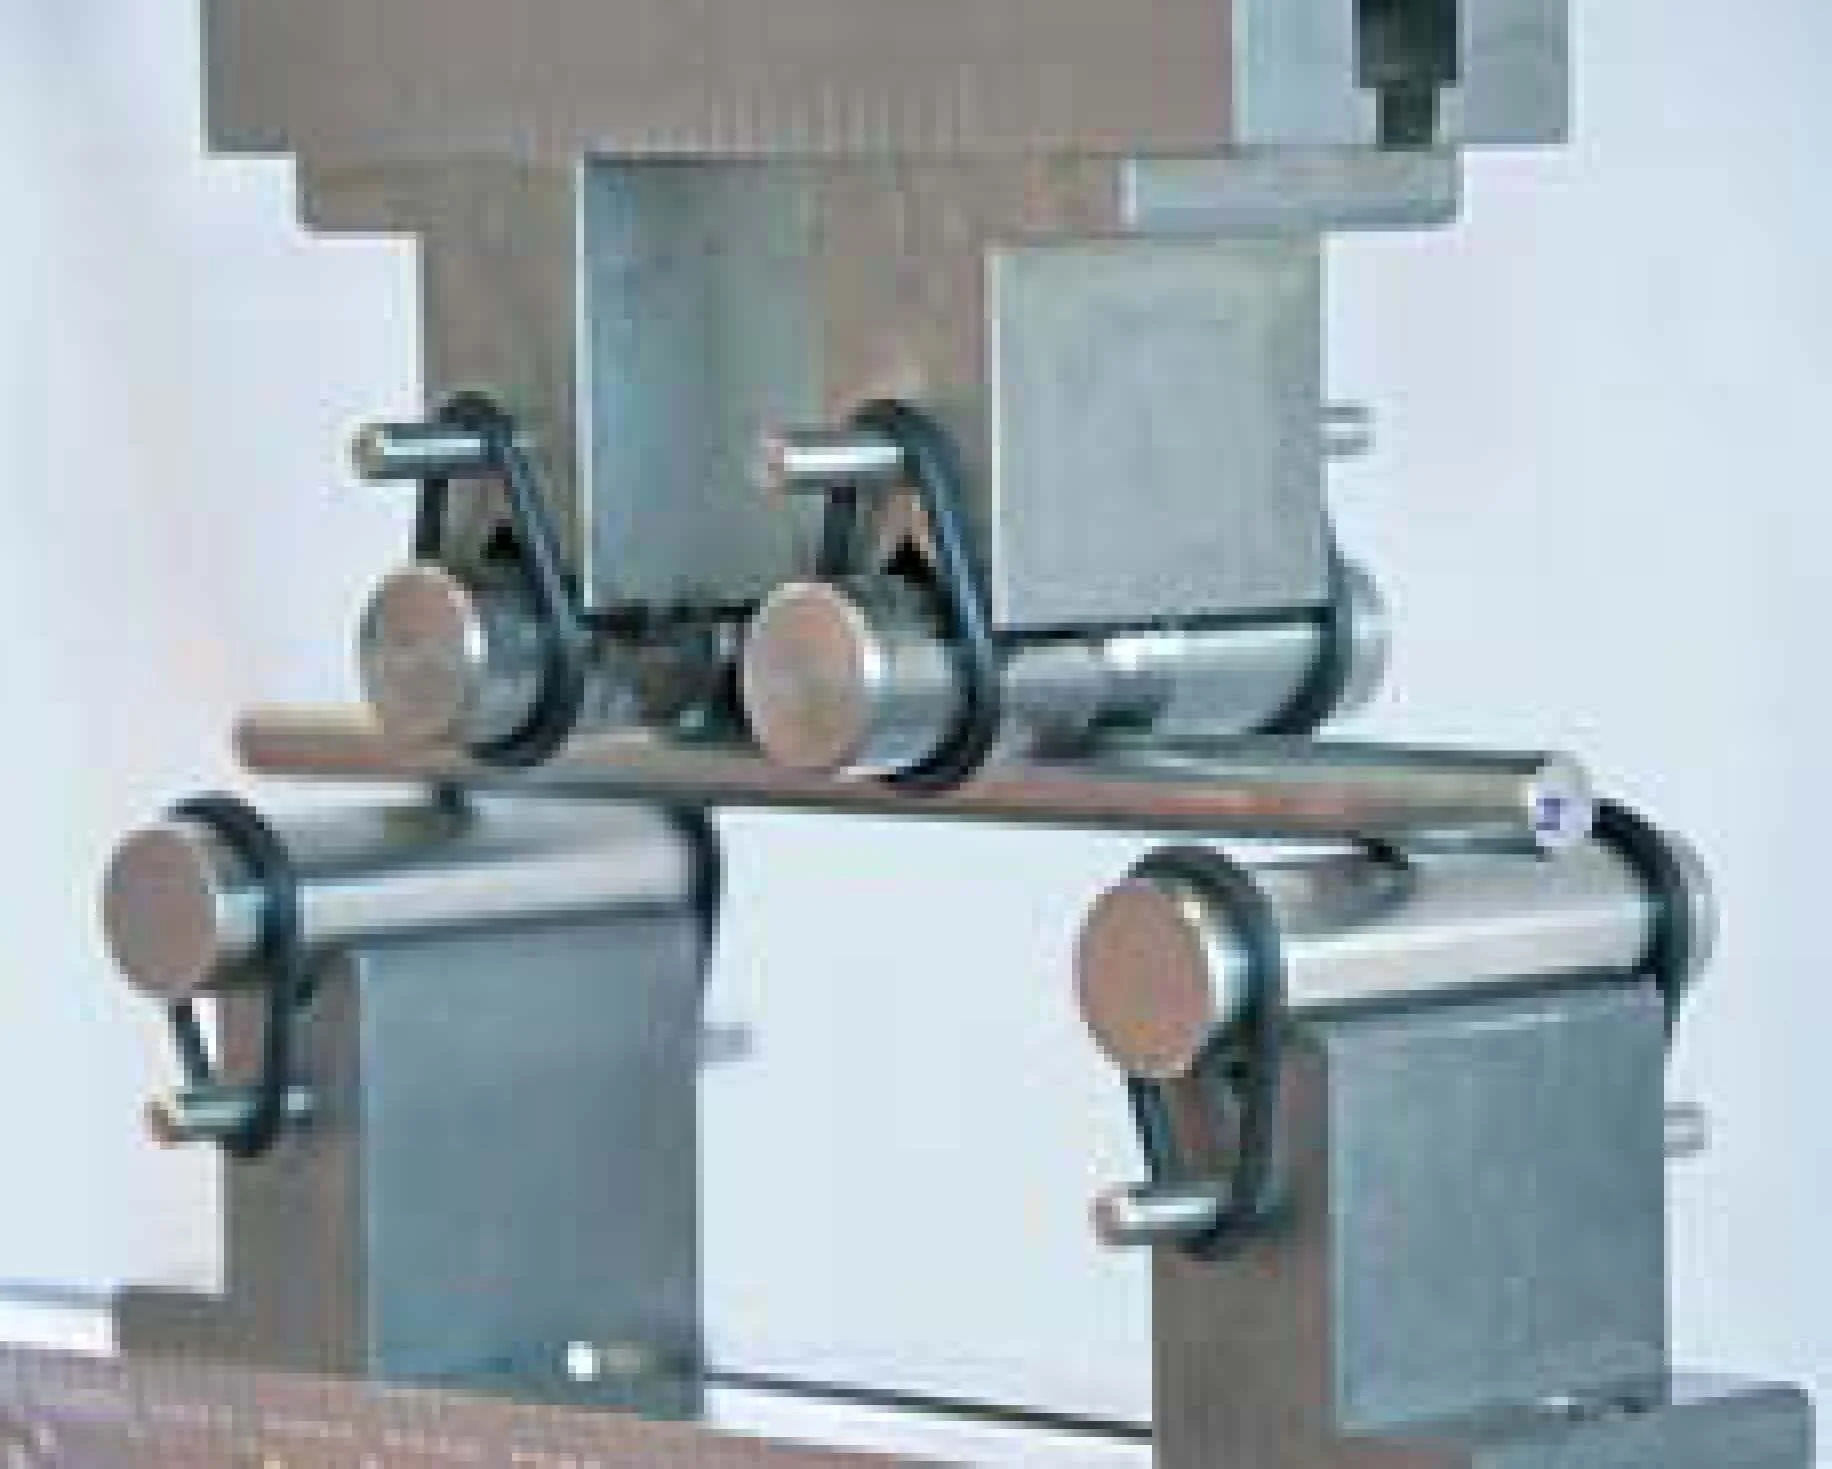 The image shows a  test setup for the fatigue testing of spines according to ASTM F2193